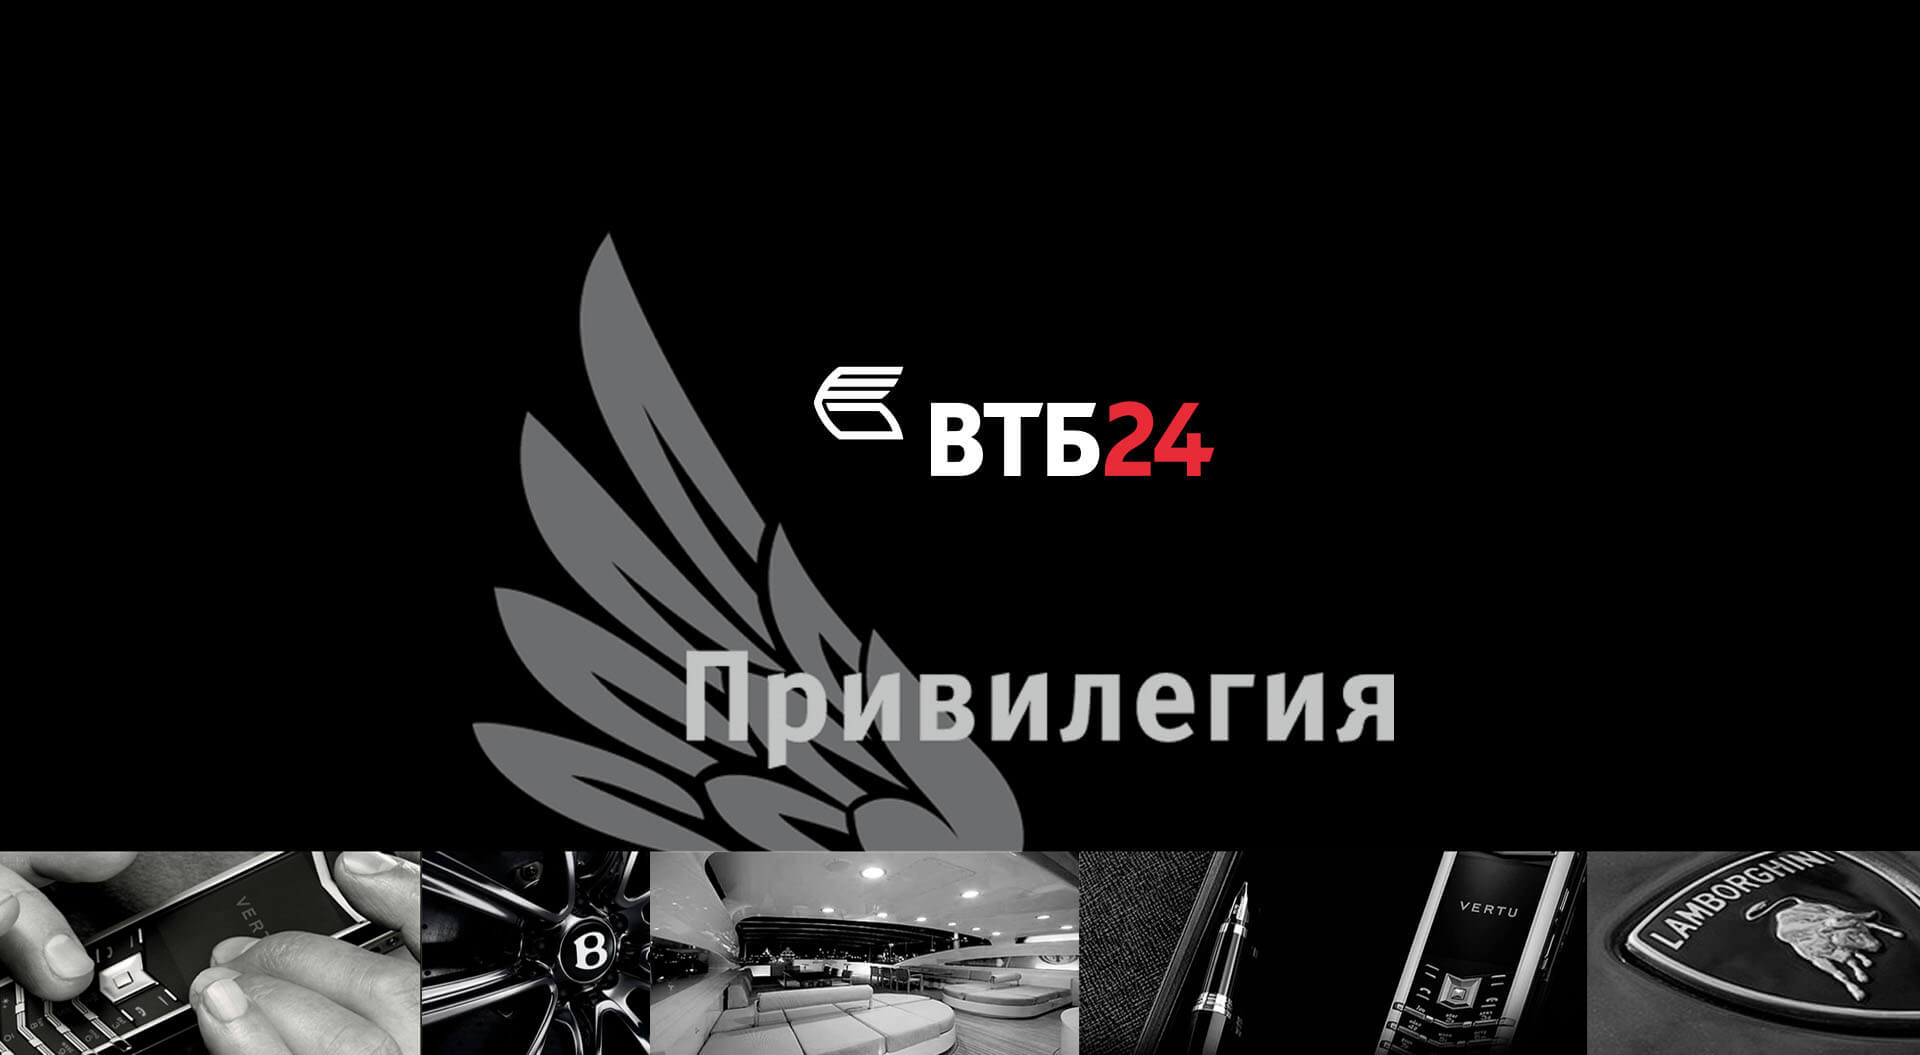 VTB24 Privilege card lifestyle branding for high-net-worth customers in Russia